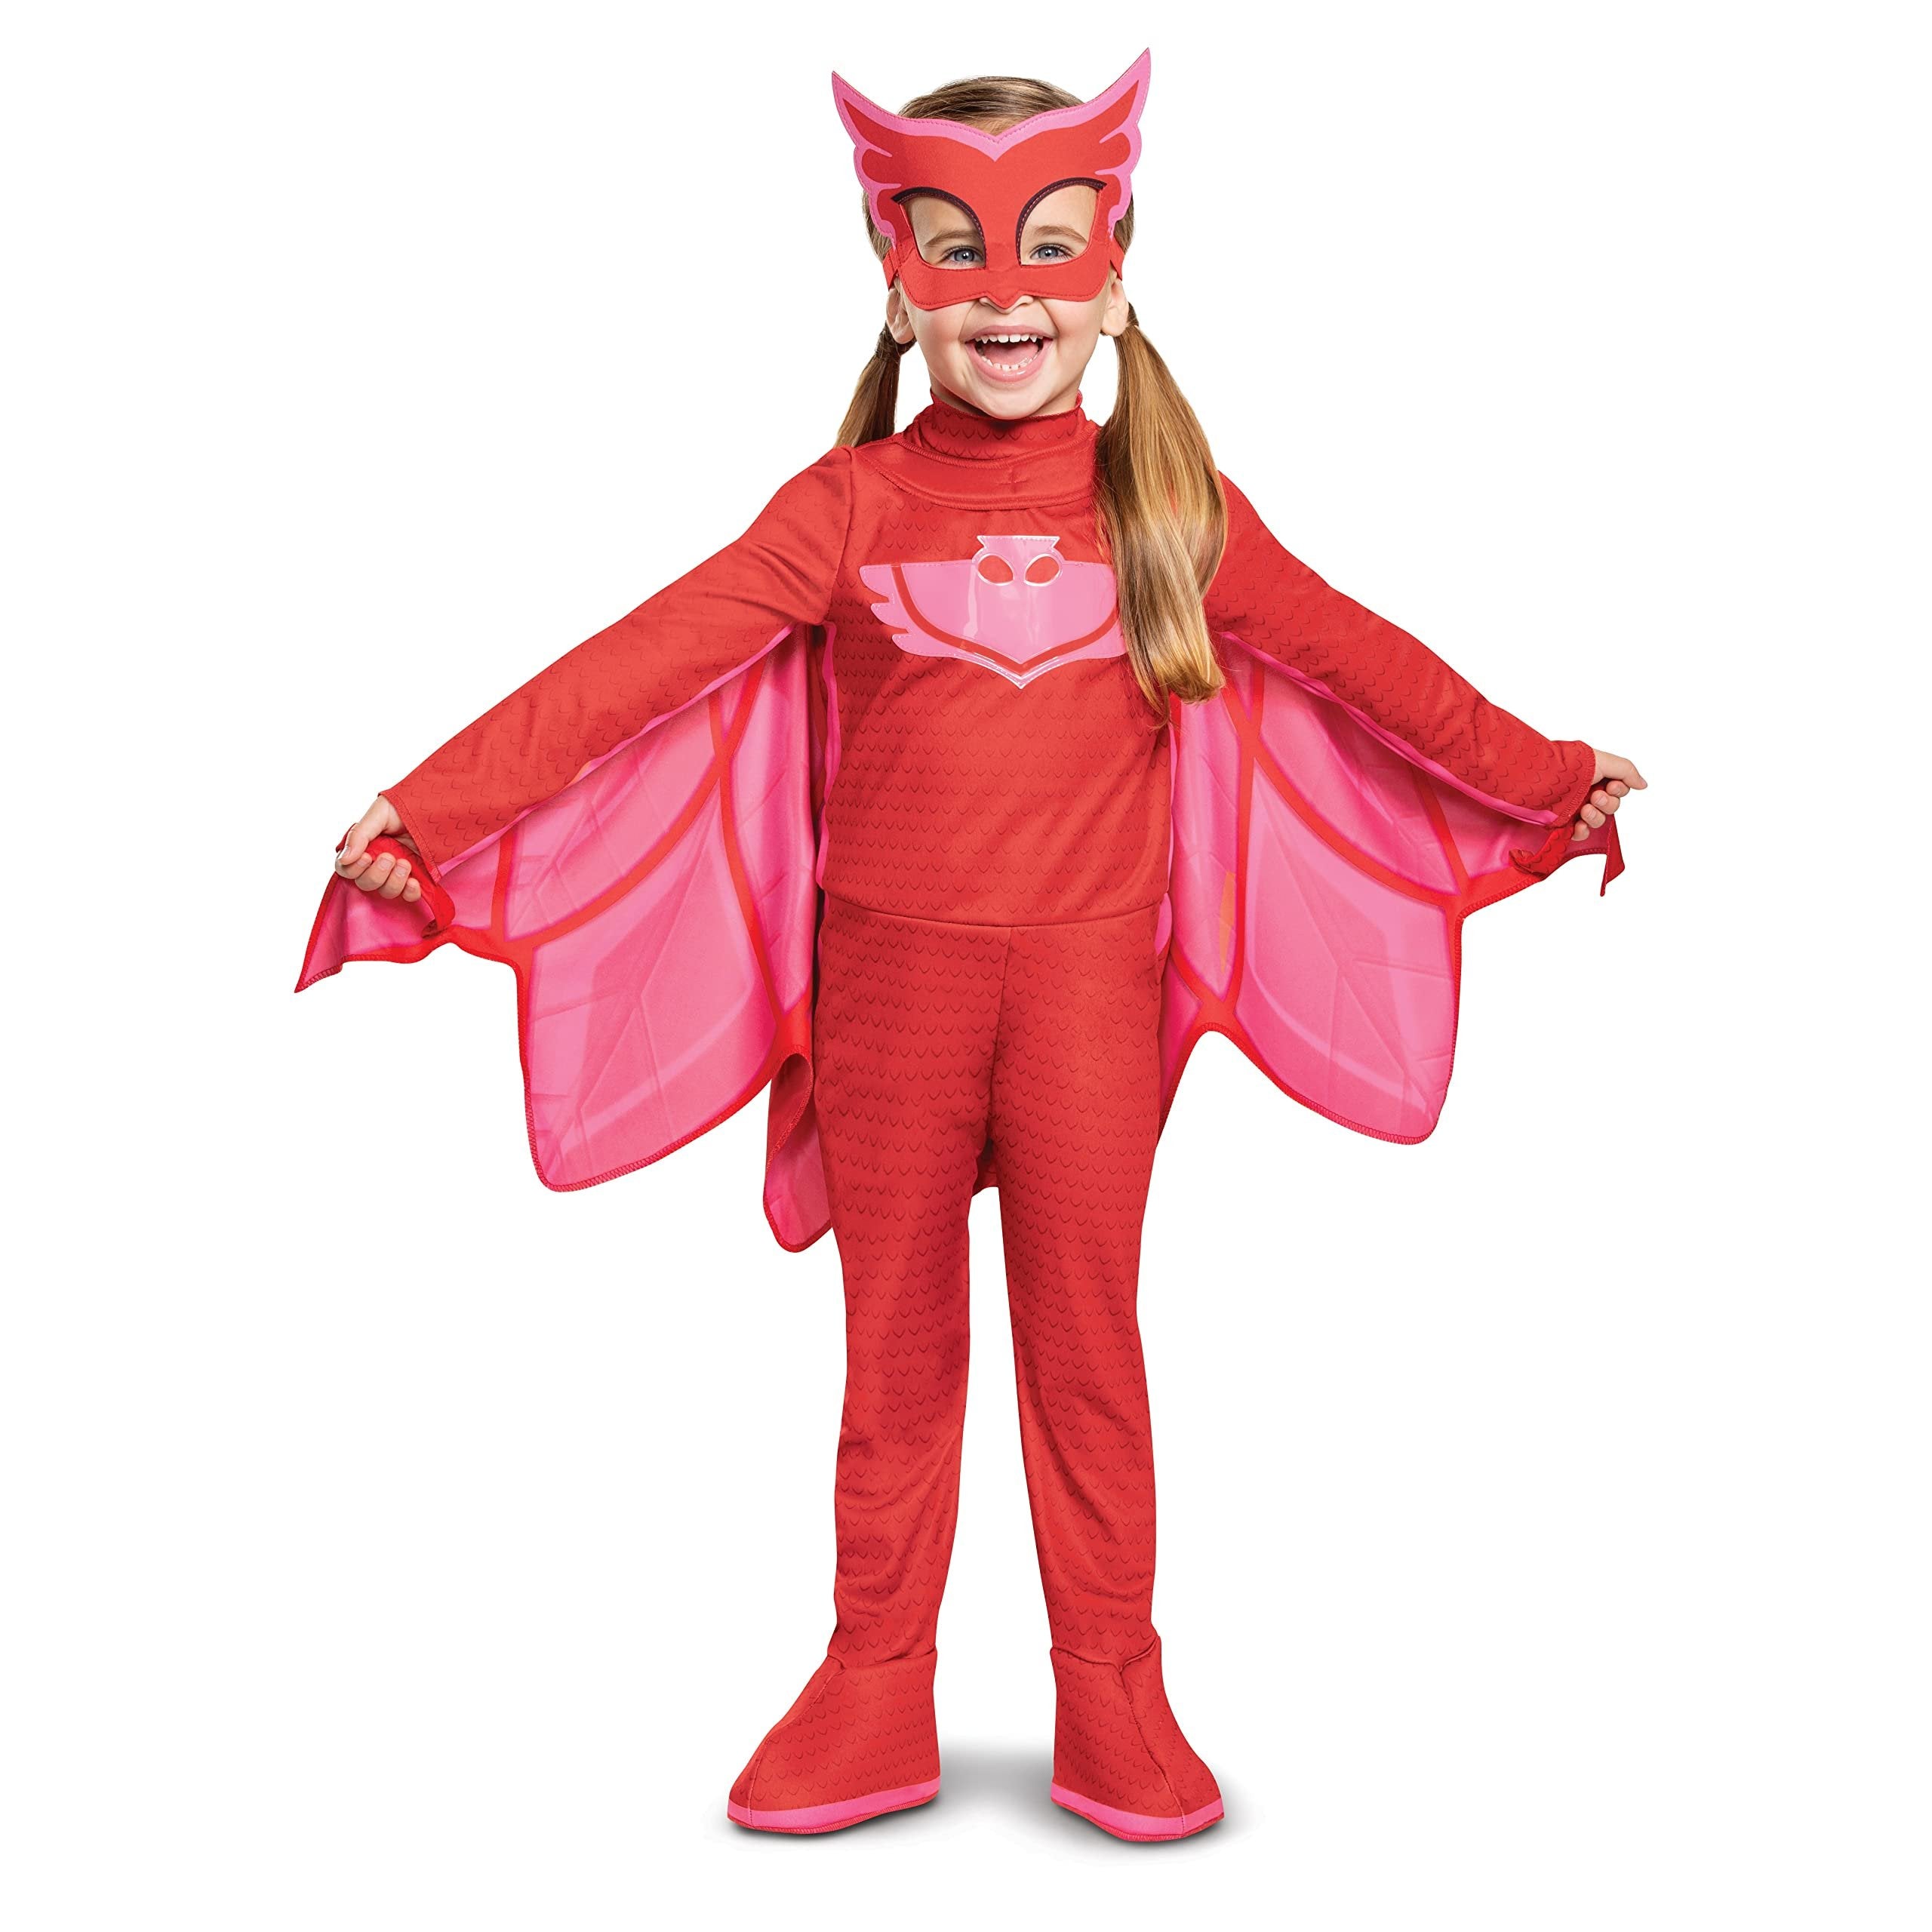 Disguise PJ Masks Owlette Costume, Deluxe Kids Light Up Jumpsuit Outfit and Character Mask, Toddler Size Large (4-6x) Red